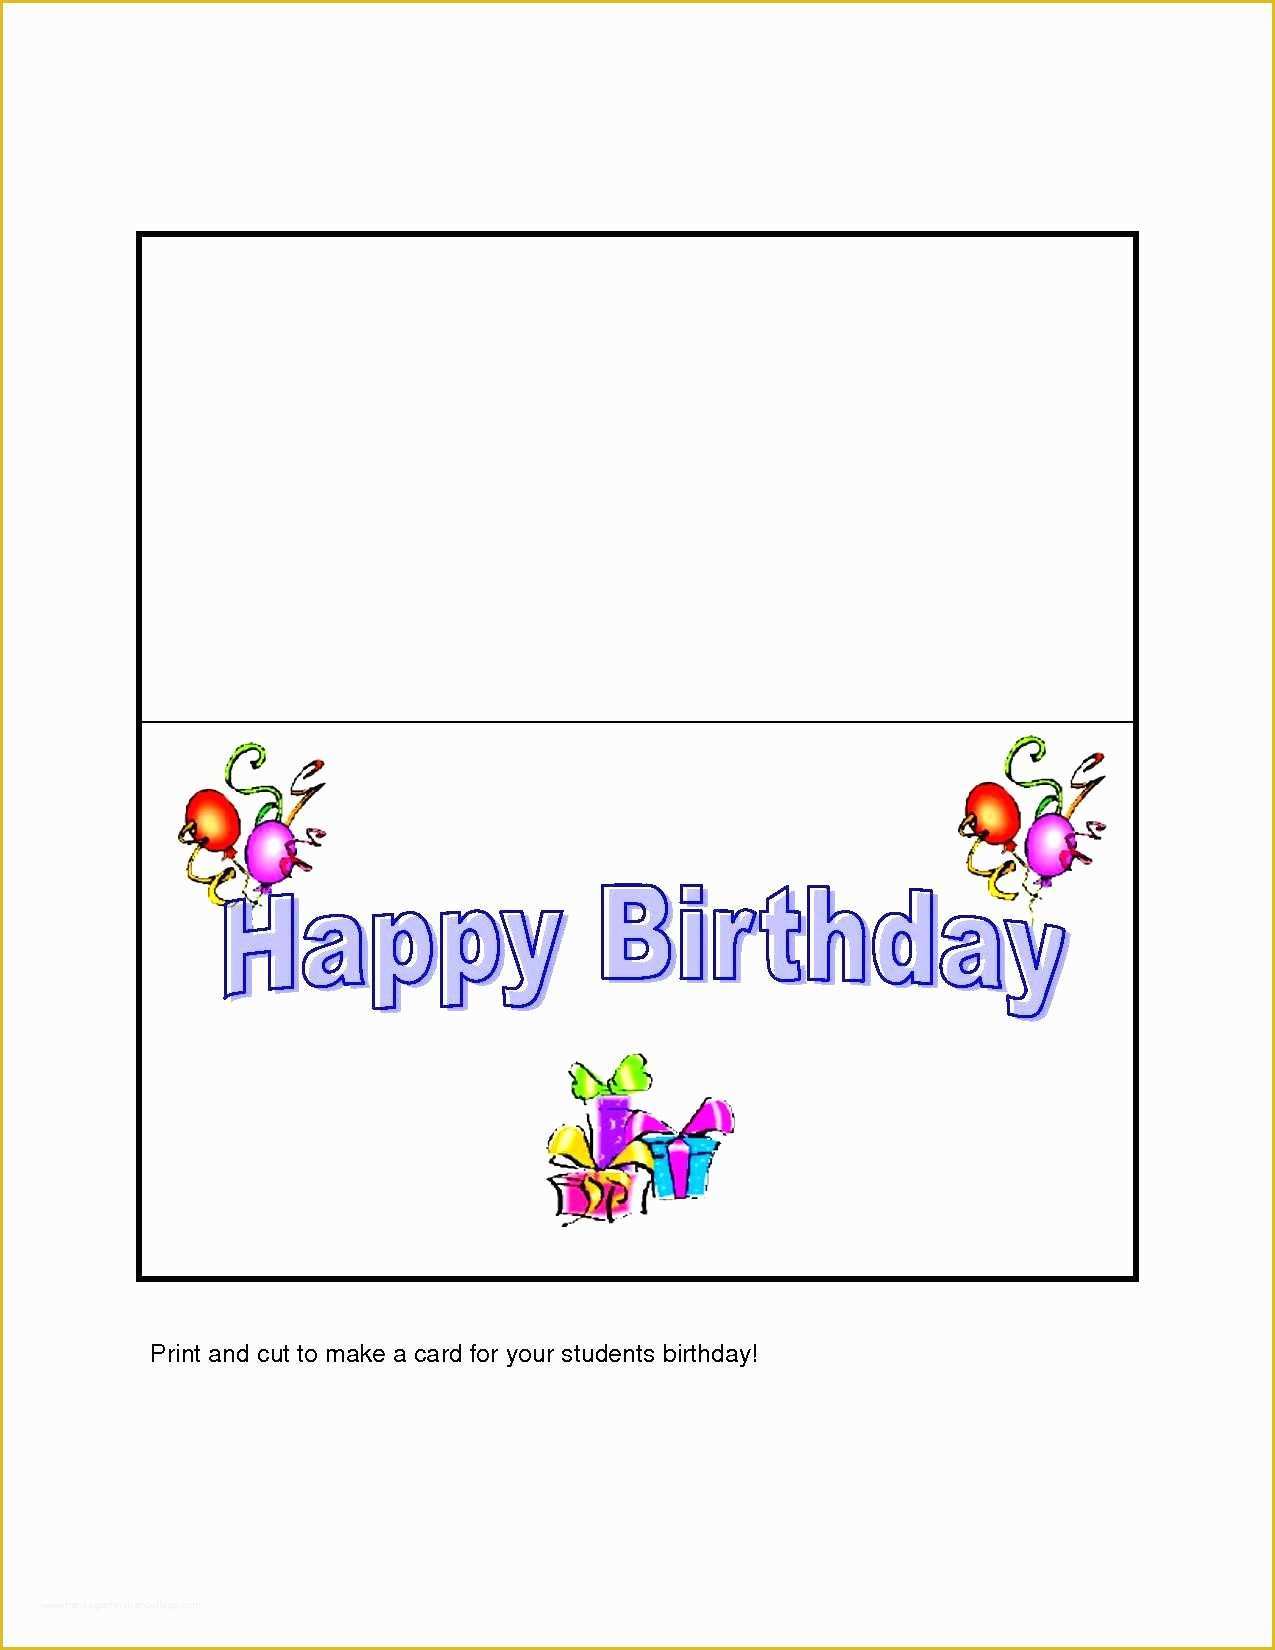 Free Postcard Templates for Word Of Gift Box Templates Free Printable Card Invitation Samples